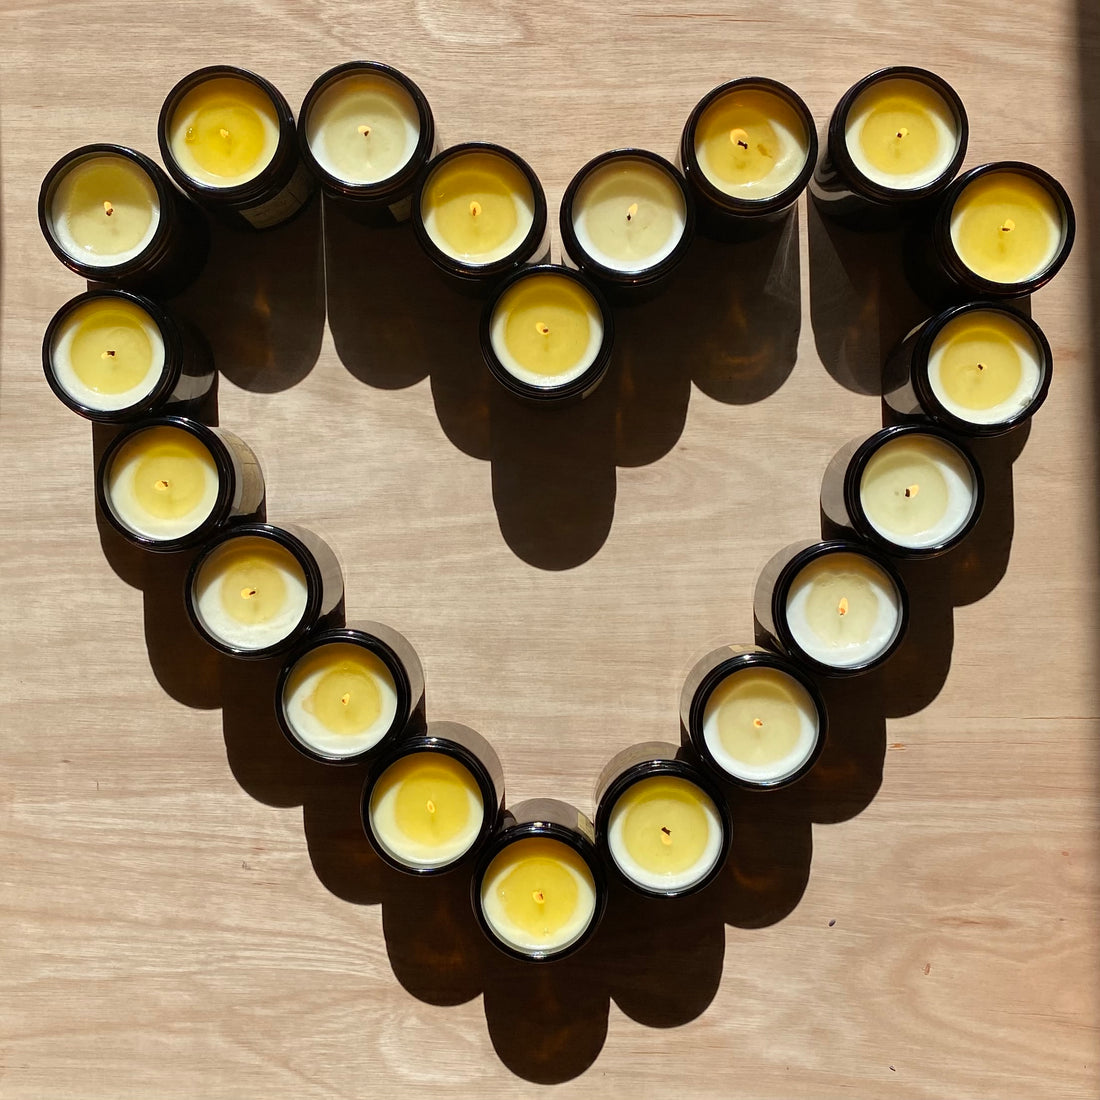 Which essential oils are best for a loving atmosphere this Valentine's Day?